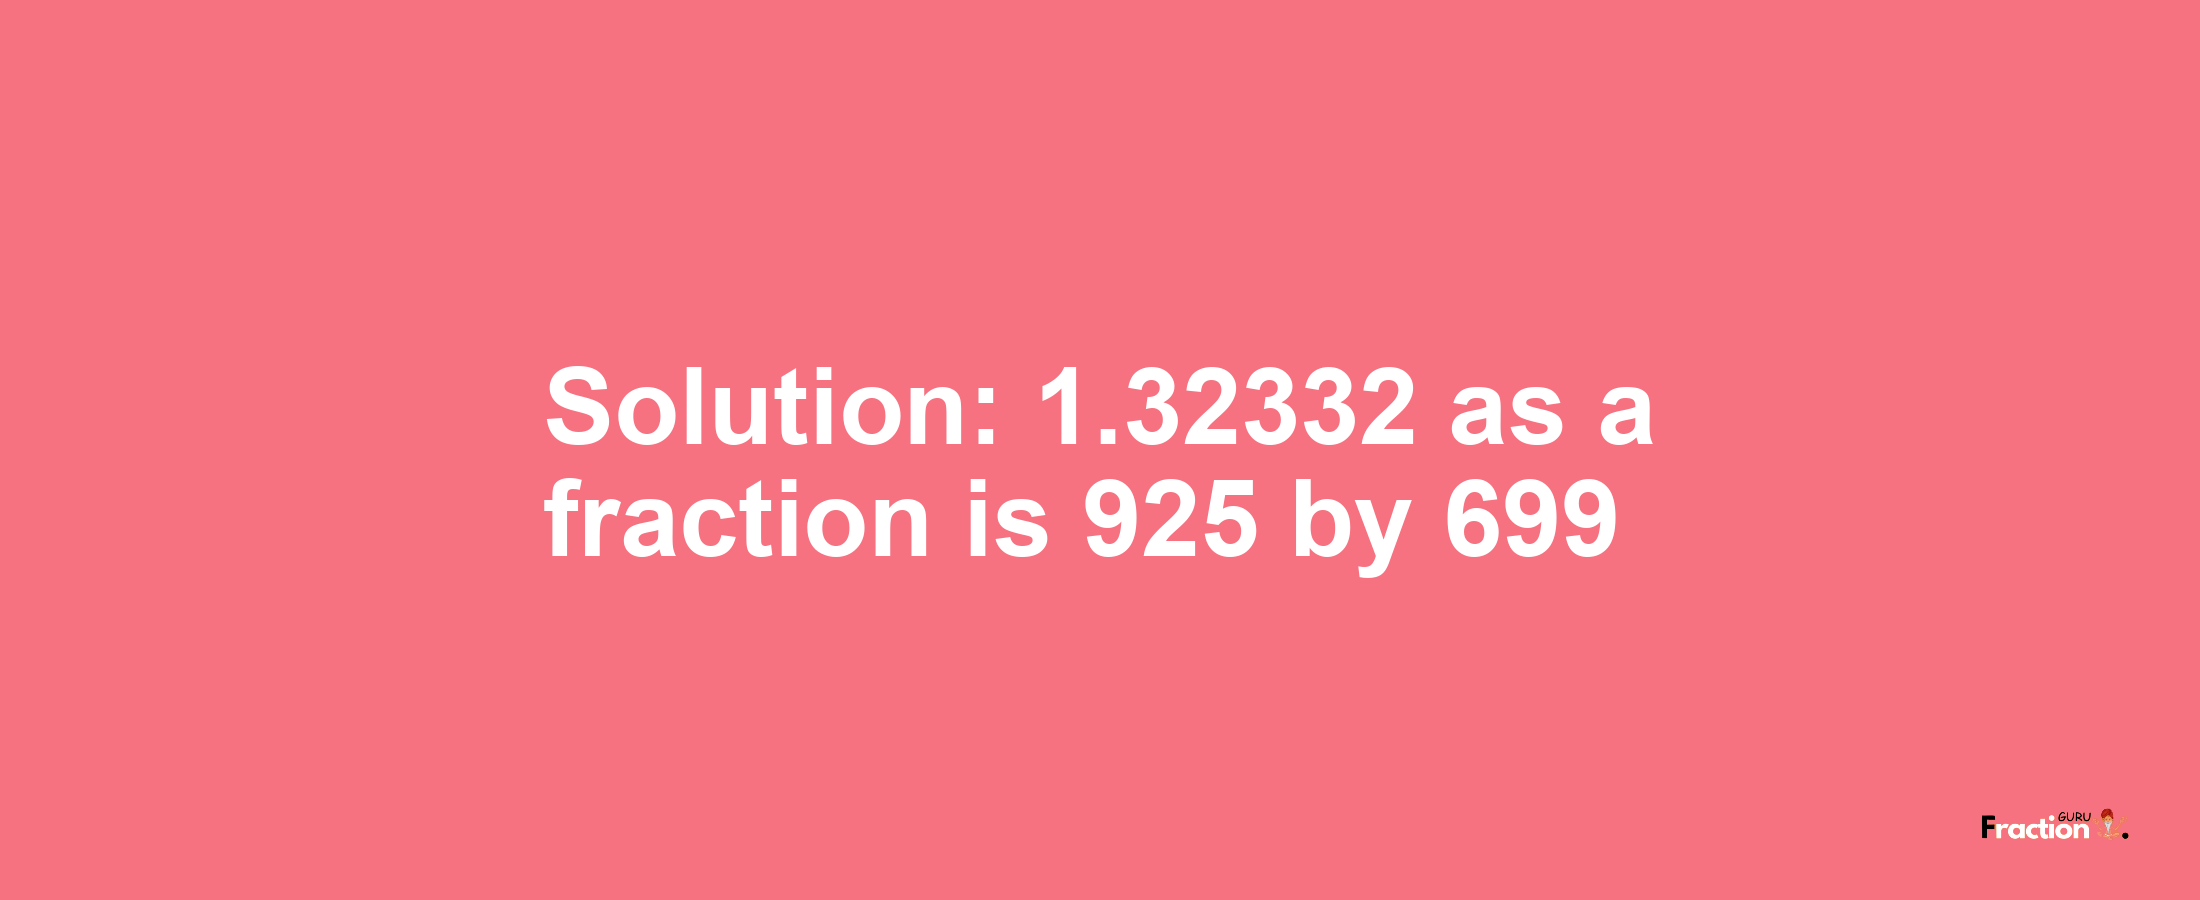 Solution:1.32332 as a fraction is 925/699